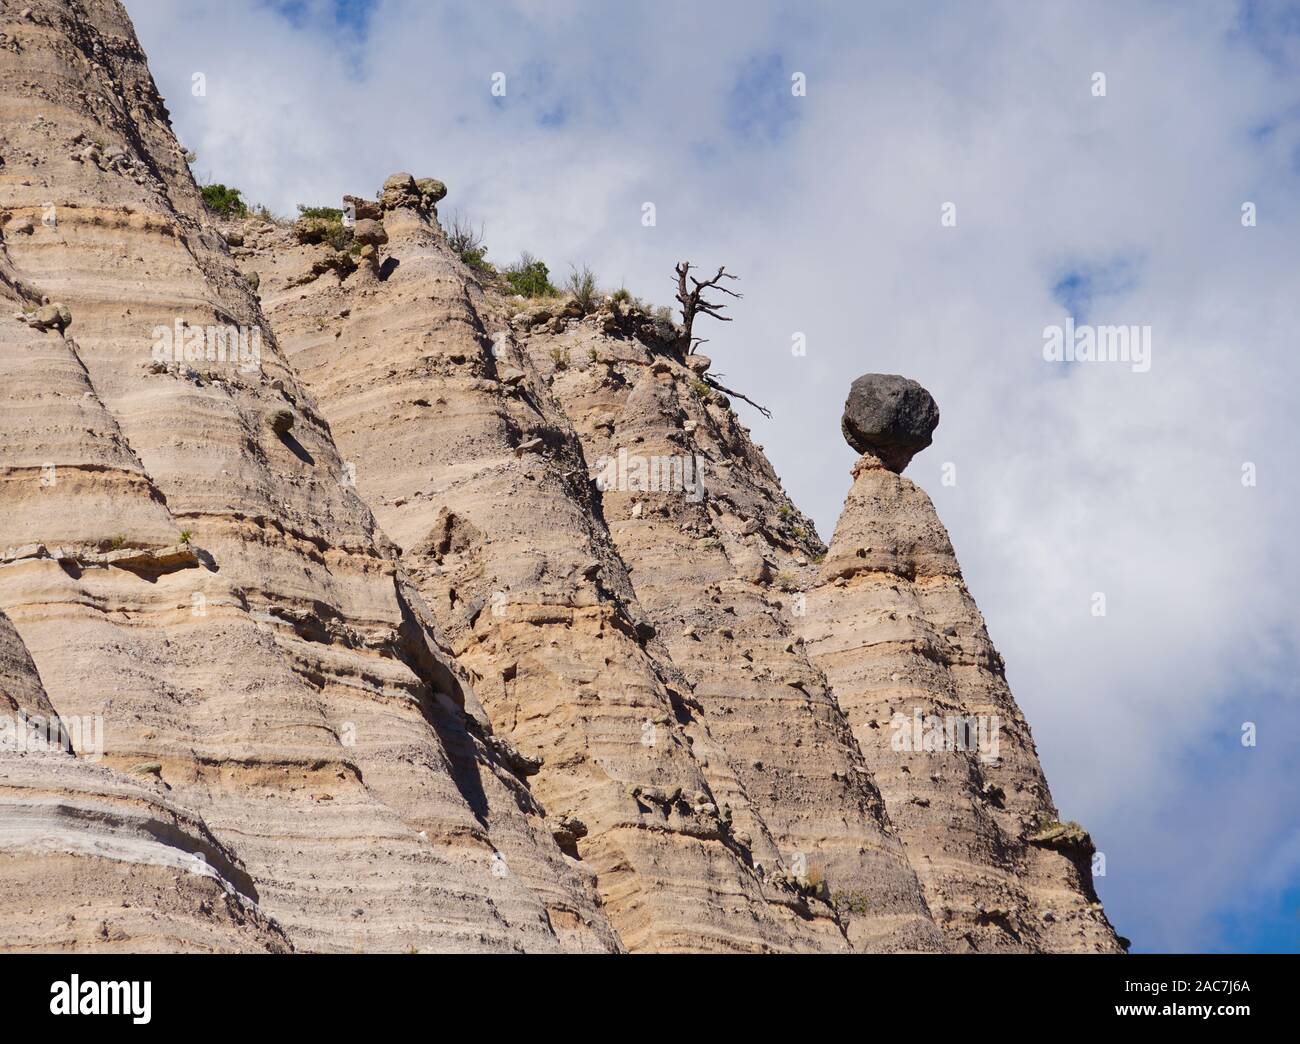 A large boulder balances precariously on top of a sandstone tapered column in the Kasha-Katuwe Tent Rocks National Monument. Stock Photo